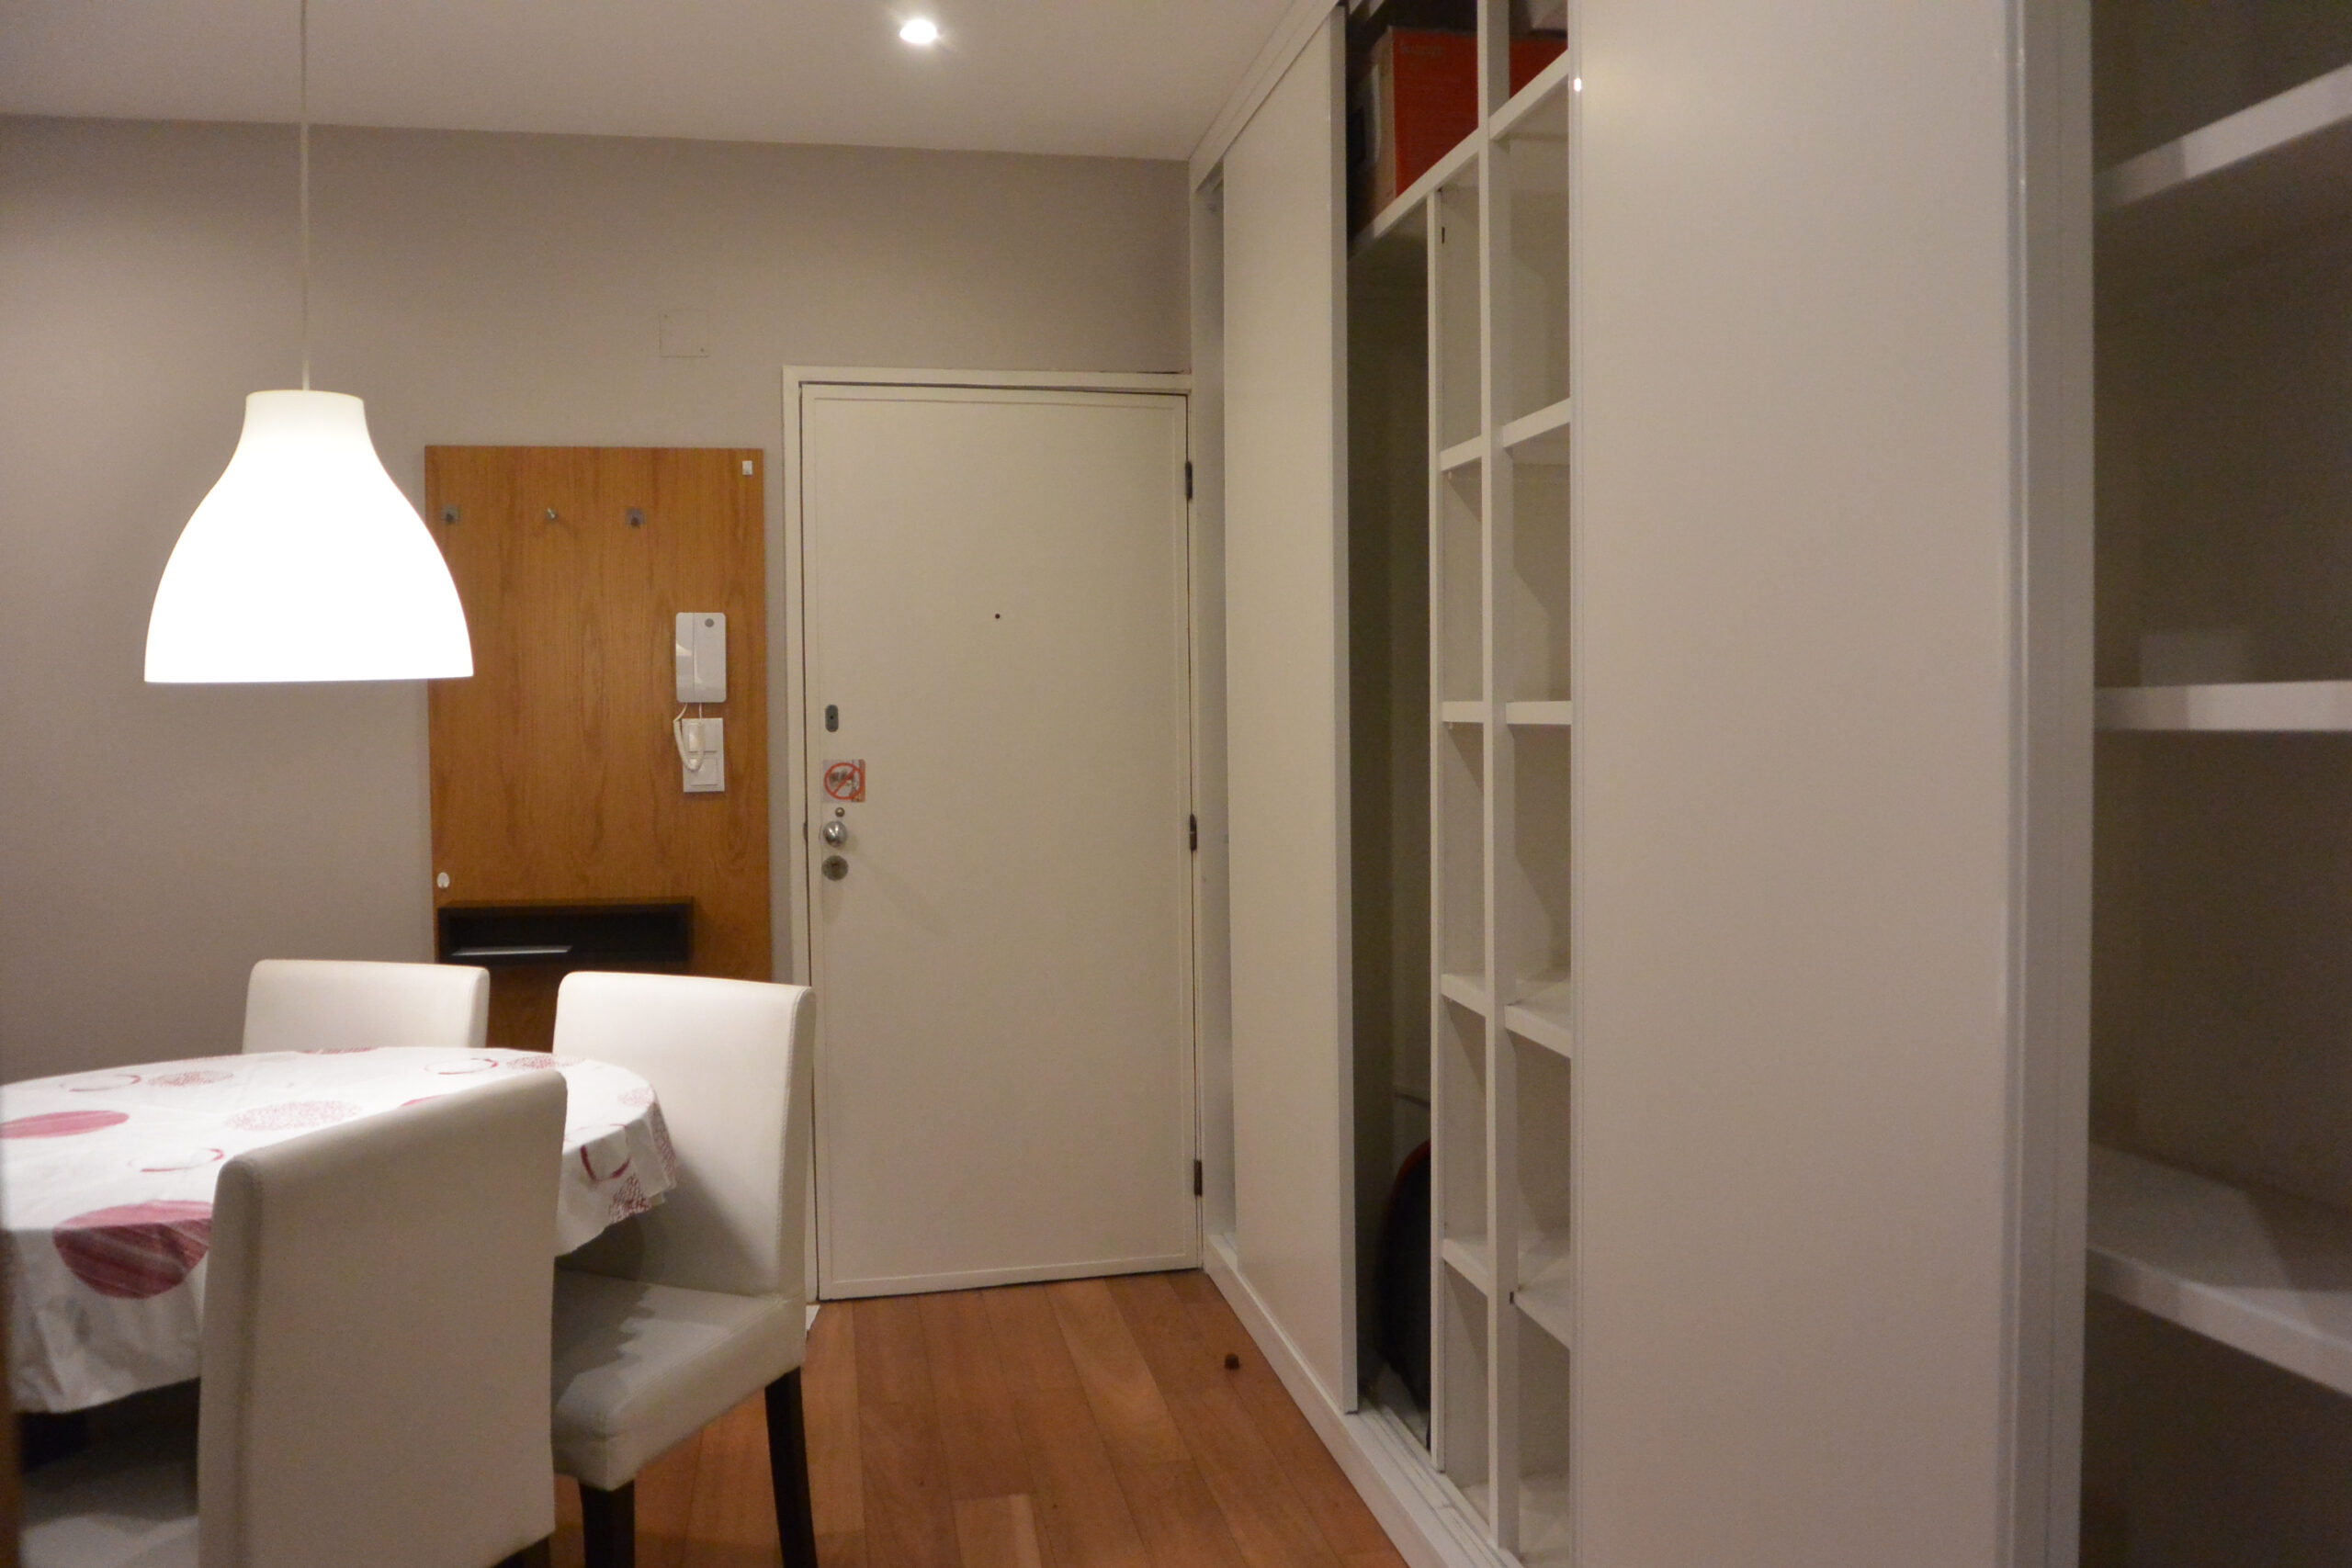 Judi Home, a central one bedroom apartment